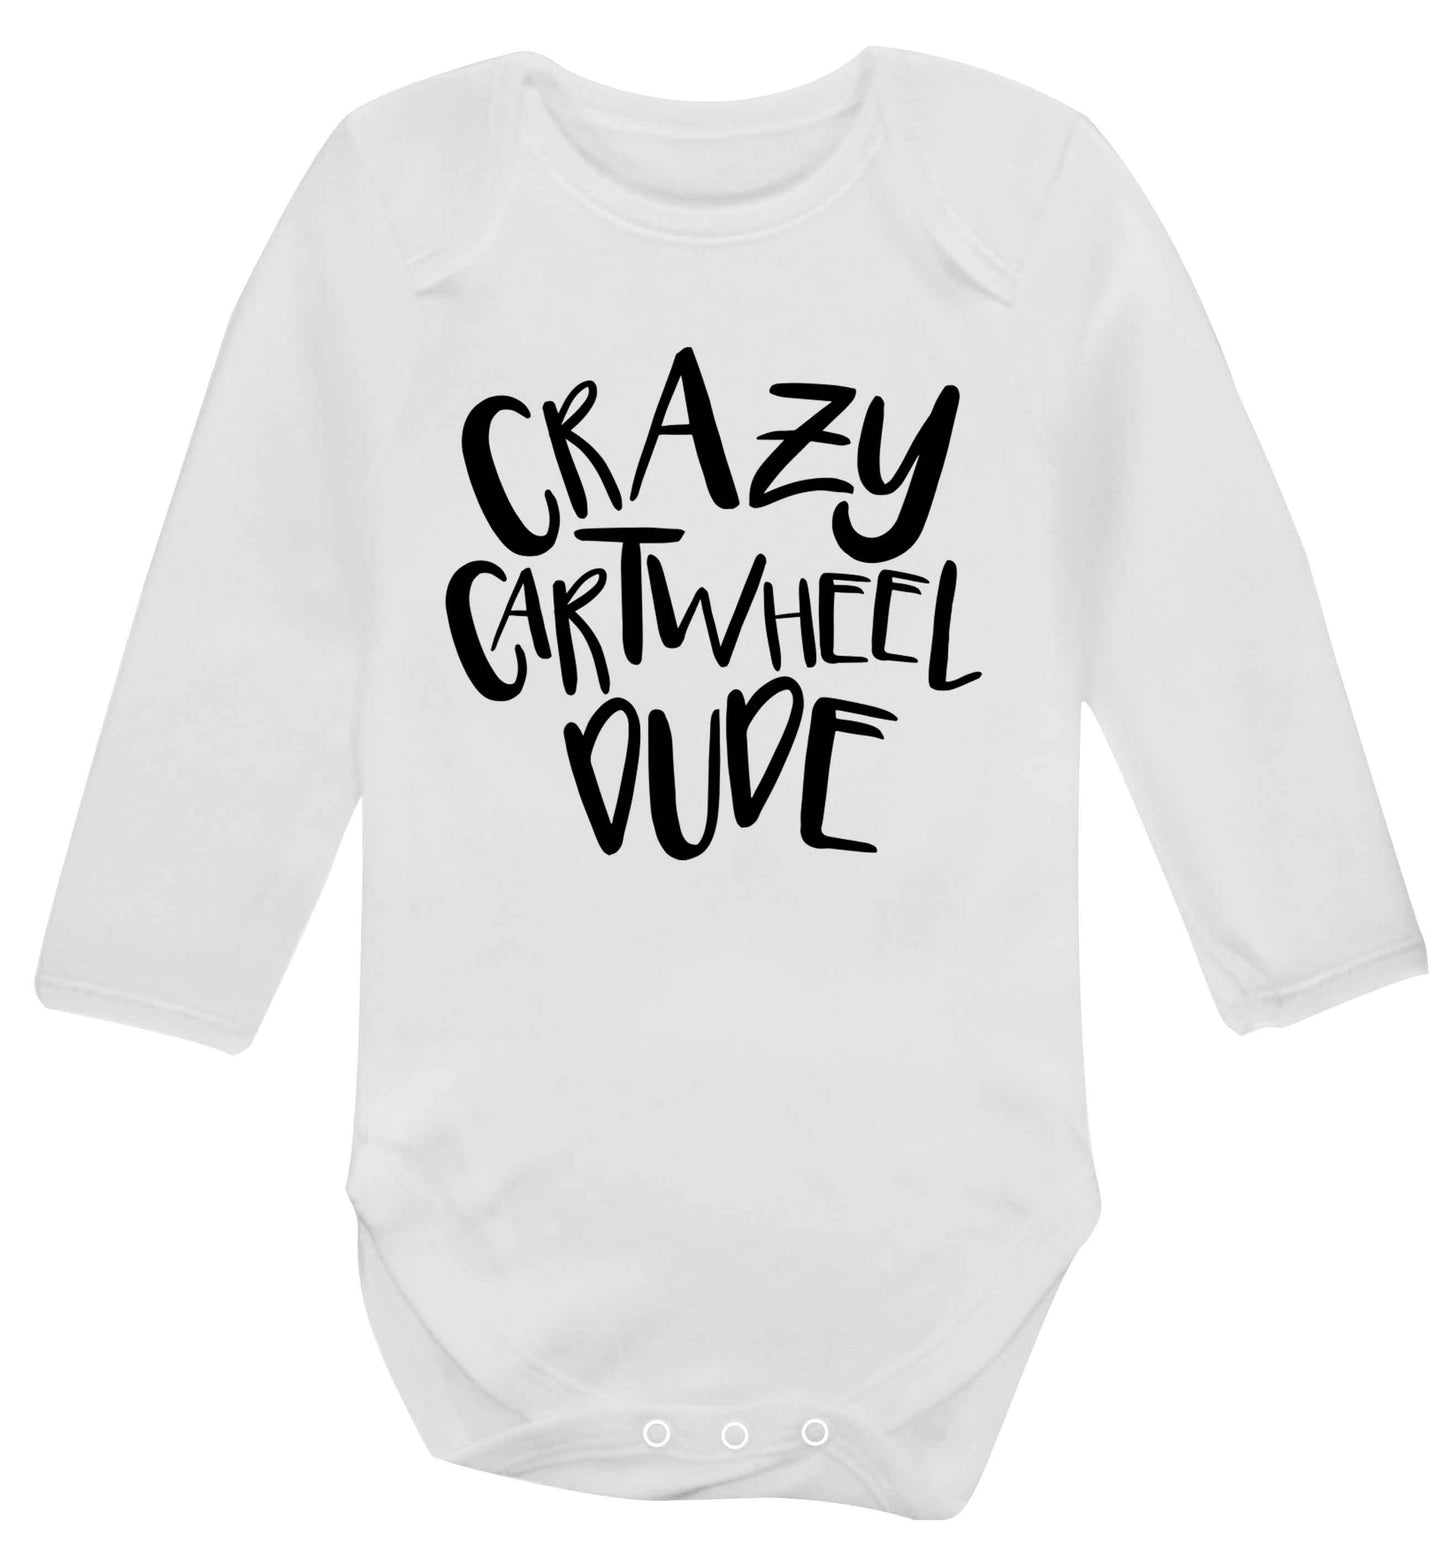 Crazy cartwheel dude Baby Vest long sleeved white 6-12 months